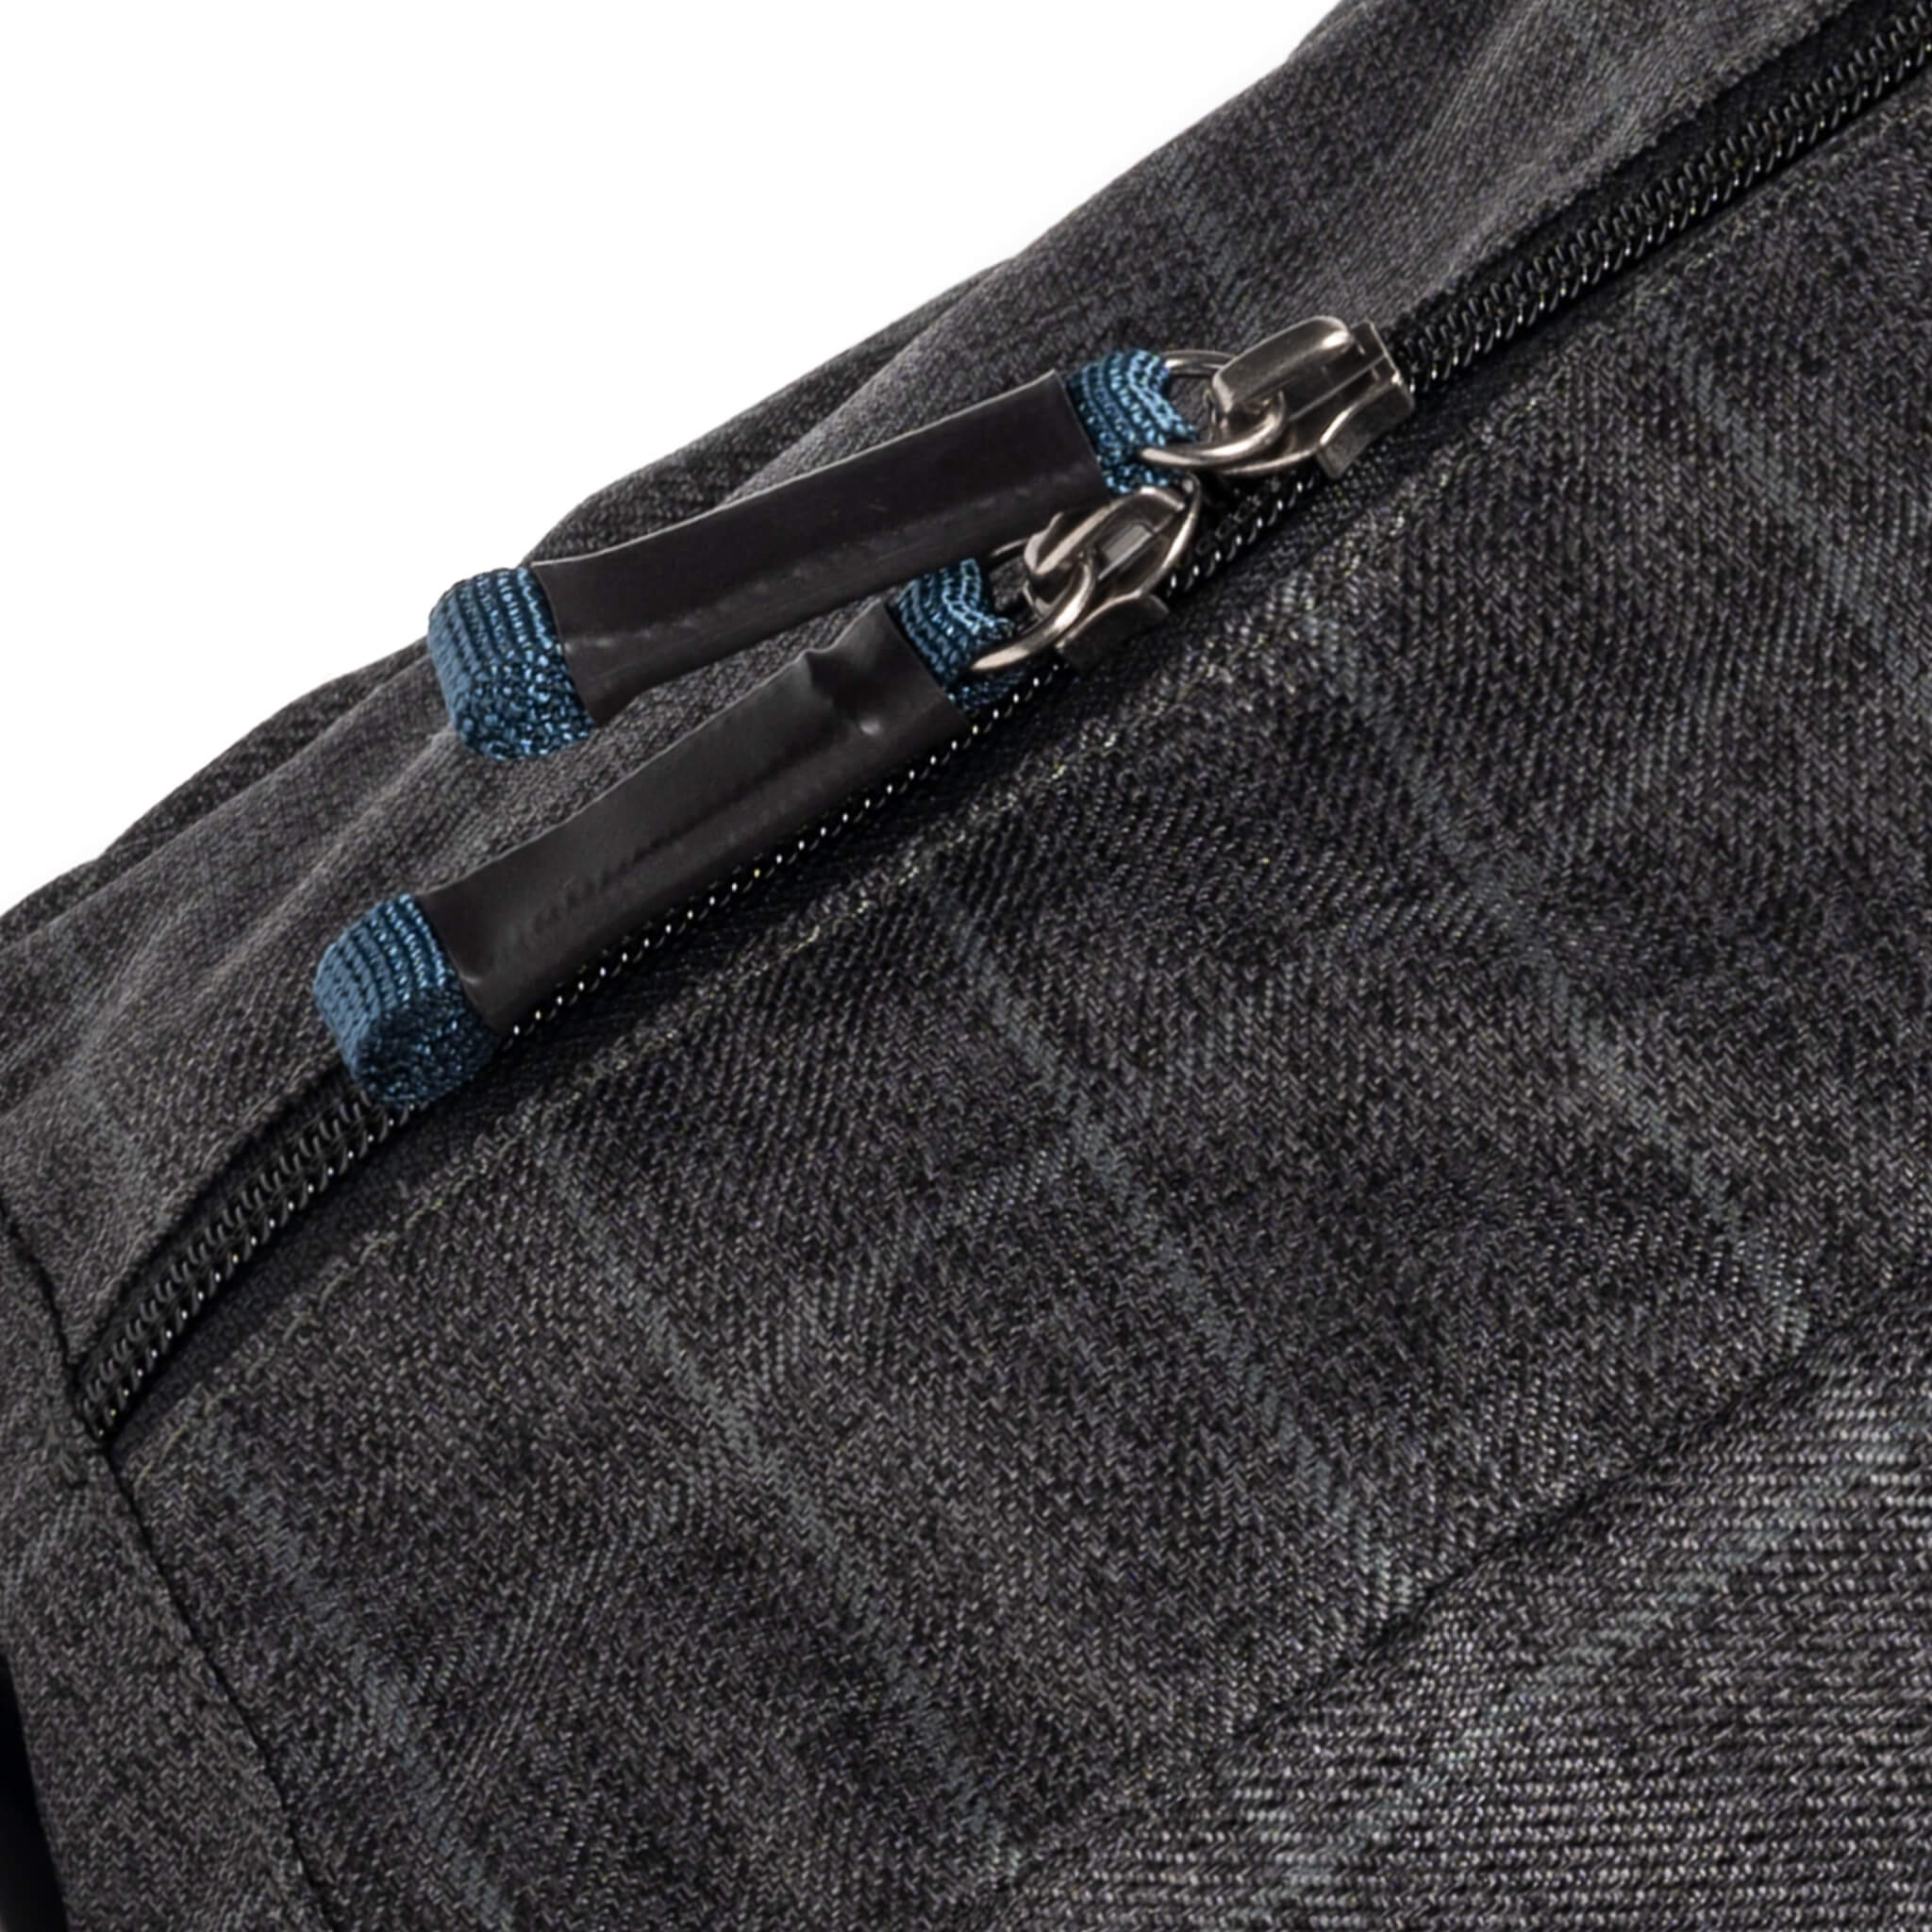 YKK® RC zippers with easy-grab pulls